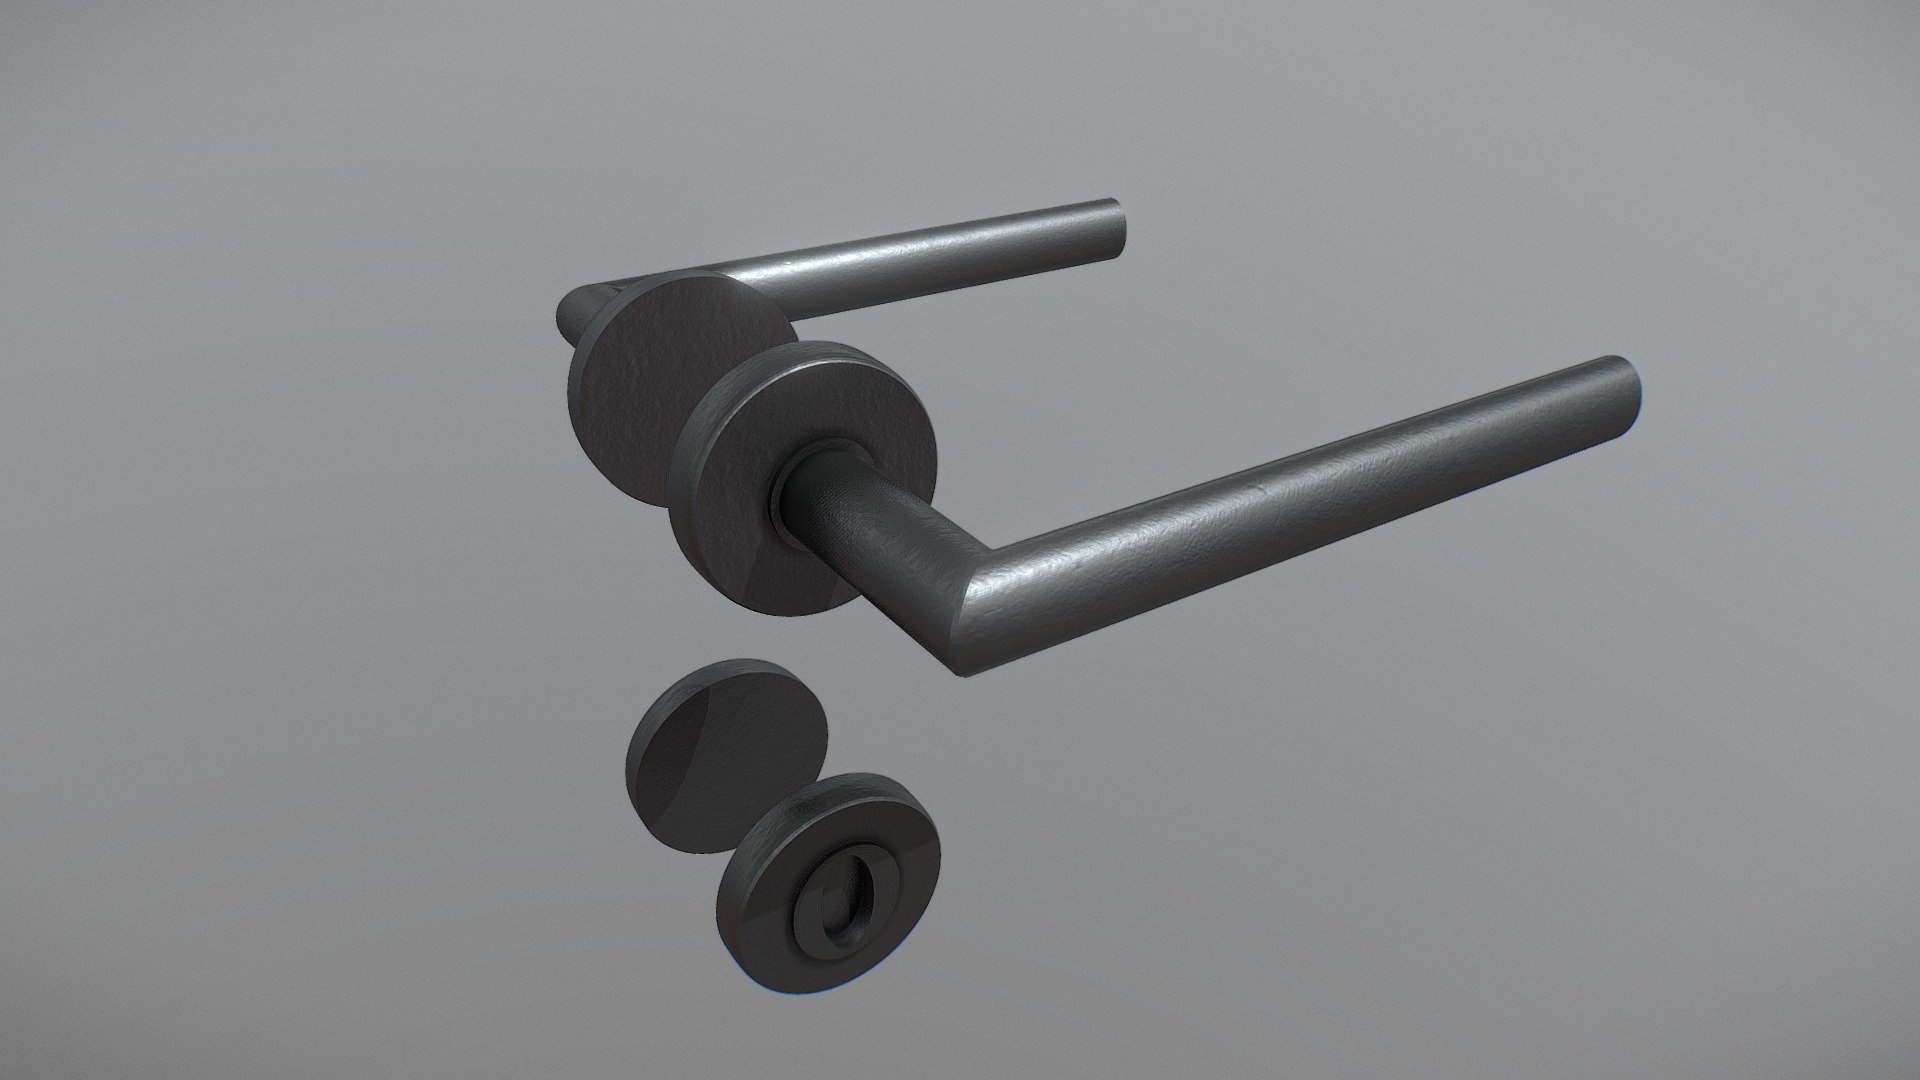 Very simple door handle. 

Minimalistic modern solution for any interior.
There is two parts: Handle and the key hole.

Just ready to be placed at your door. 
I was searching for it myself, so I had to model one. 

Enjoy&hellip; - Door handle - simple and modern - Buy Royalty Free 3D model by gugusheep 3d model